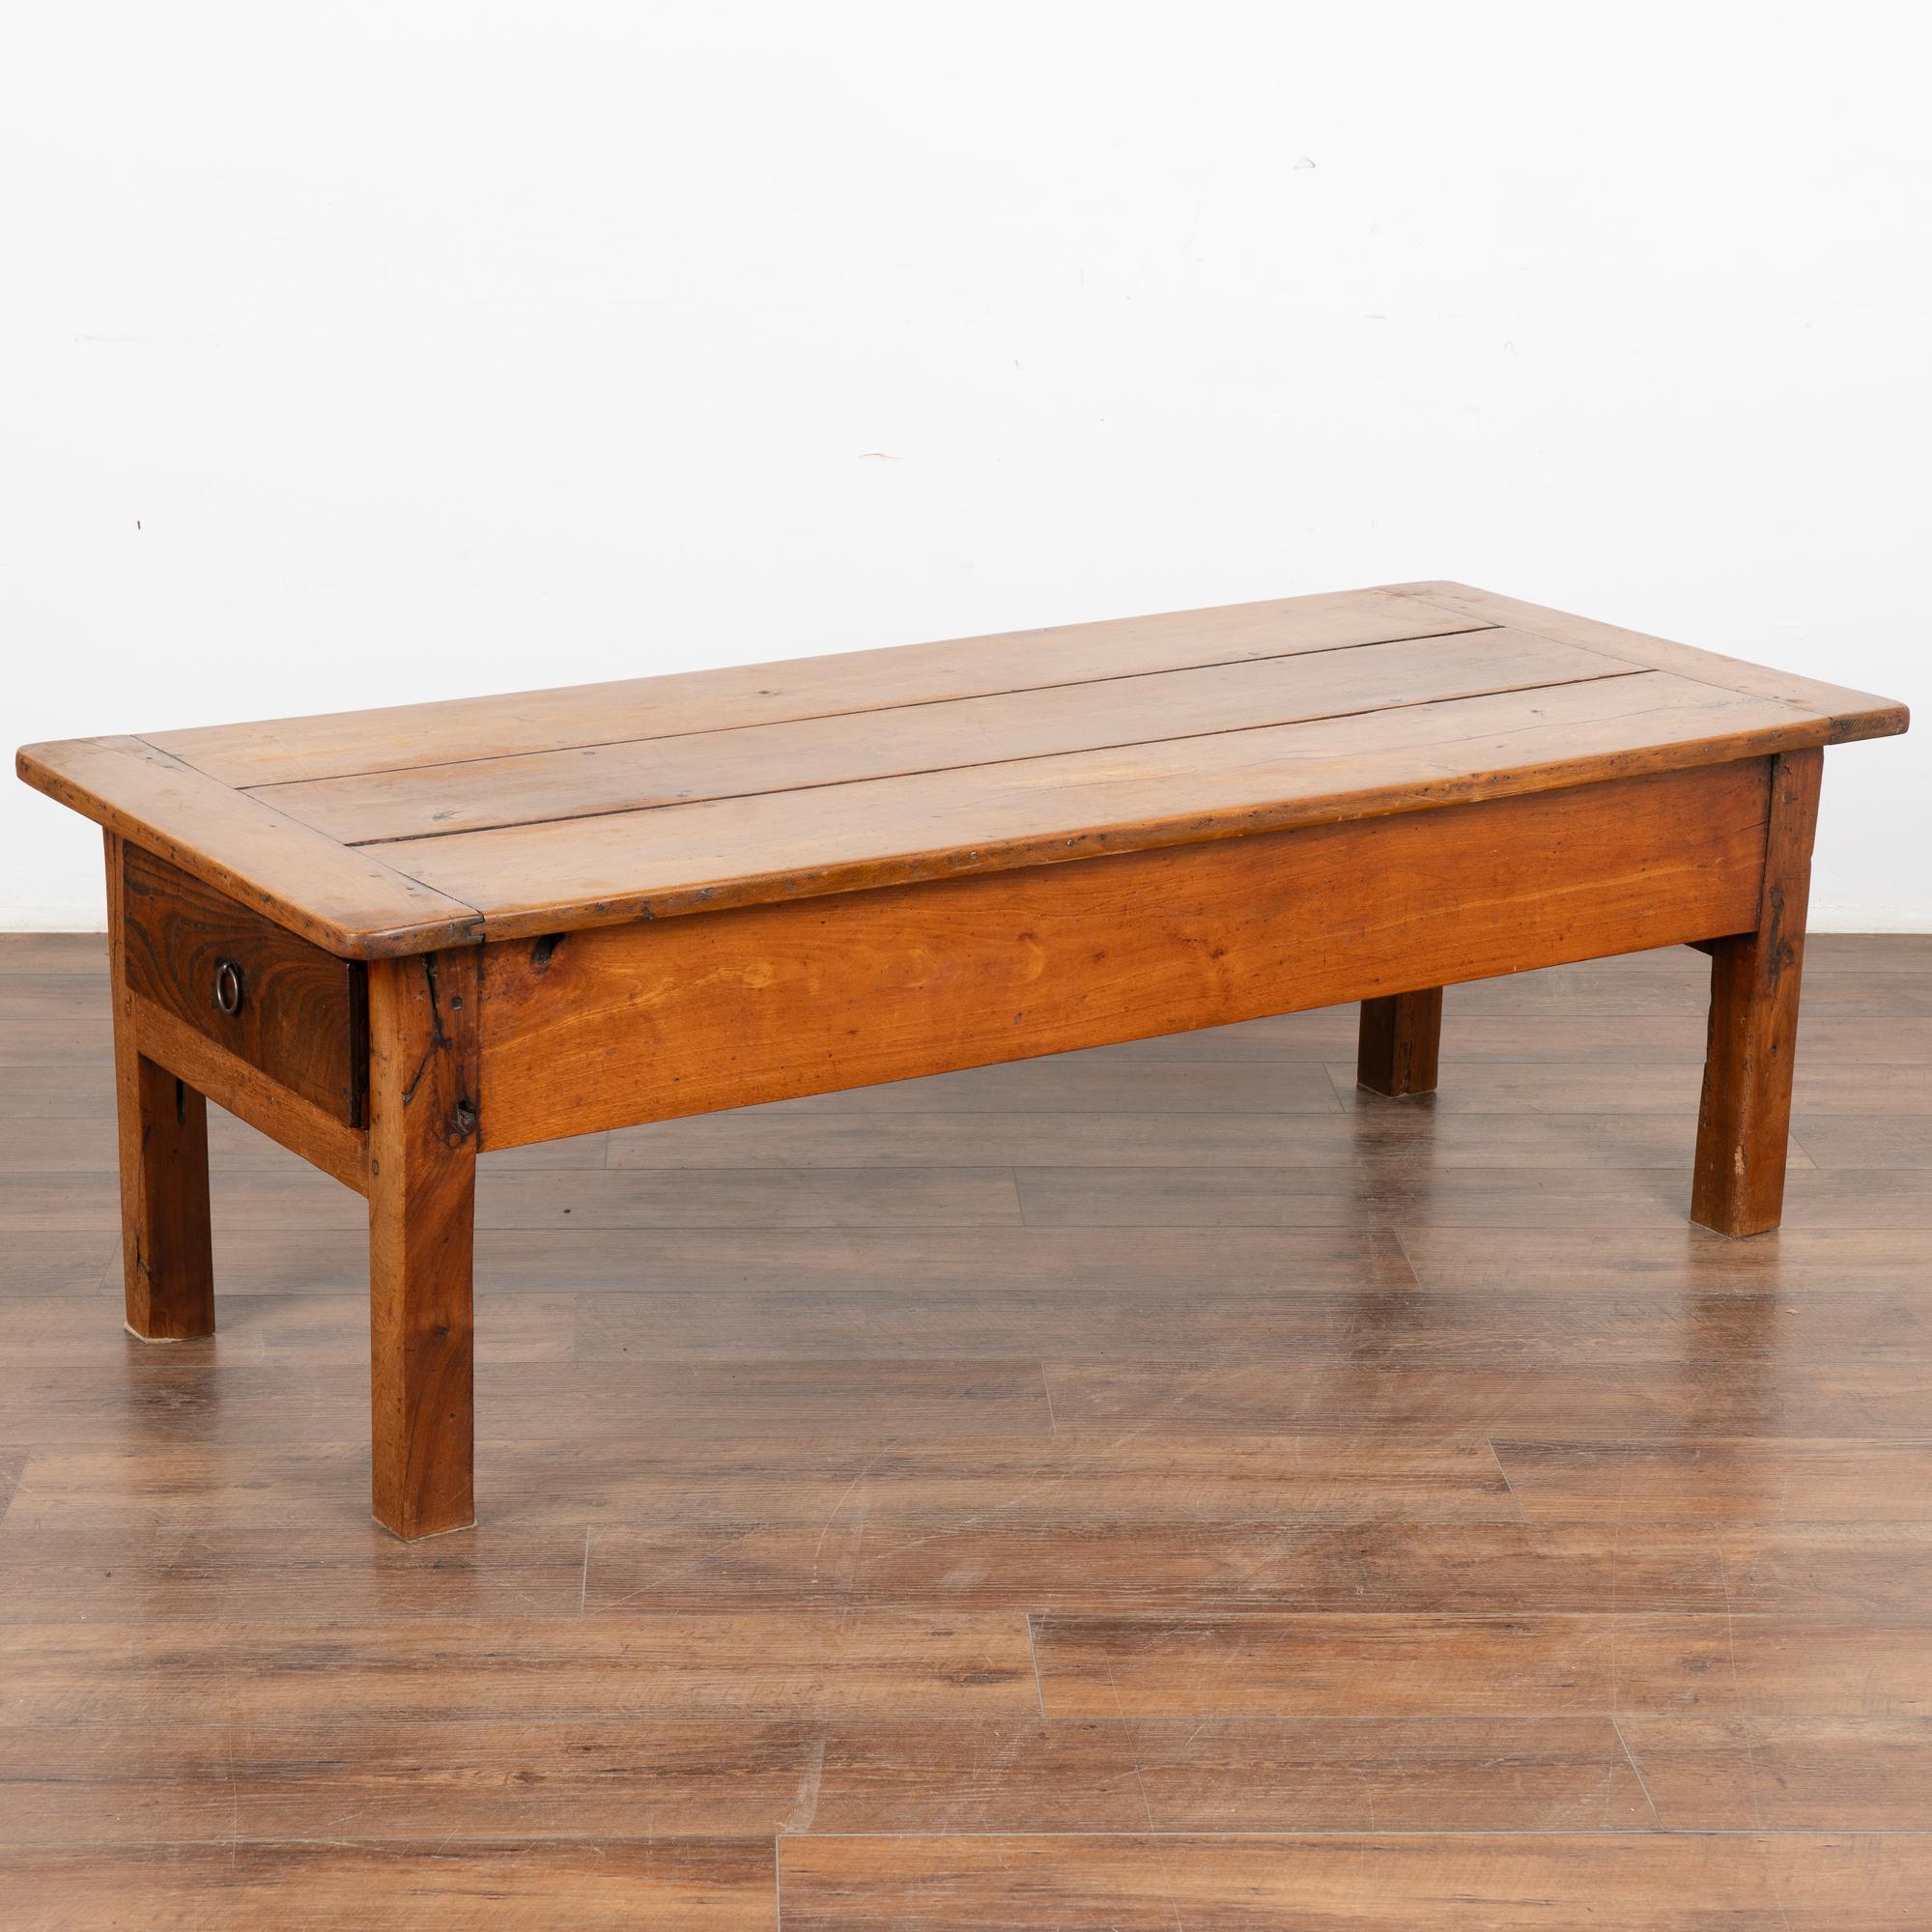 French Country Coffee Table with Two Drawers, circa 1820-40 For Sale 3